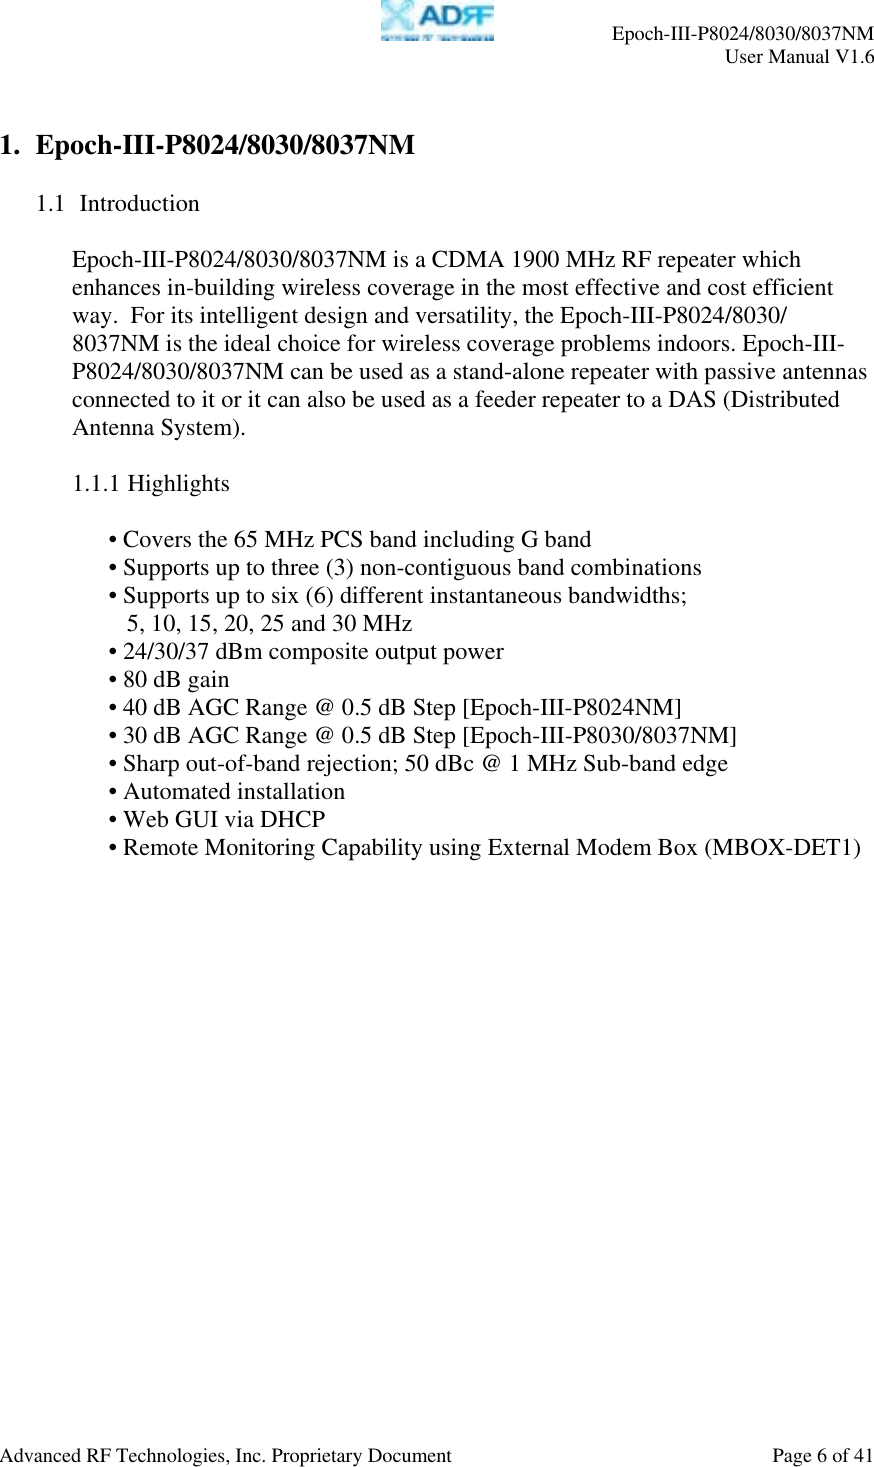     Epoch-III-P8024/8030/8037NM  User Manual V1.6  Advanced RF Technologies, Inc. Proprietary Document  Page 6 of 41  1. Epoch-III-P8024/8030/8037NM  1.1  Introduction  Epoch-III-P8024/8030/8037NM is a CDMA 1900 MHz RF repeater which enhances in-building wireless coverage in the most effective and cost efficient way.  For its intelligent design and versatility, the Epoch-III-P8024/8030/ 8037NM is the ideal choice for wireless coverage problems indoors. Epoch-III-P8024/8030/8037NM can be used as a stand-alone repeater with passive antennas connected to it or it can also be used as a feeder repeater to a DAS (Distributed Antenna System).  1.1.1 Highlights  • Covers the 65 MHz PCS band including G band • Supports up to three (3) non-contiguous band combinations • Supports up to six (6) different instantaneous bandwidths;  5, 10, 15, 20, 25 and 30 MHz • 24/30/37 dBm composite output power • 80 dB gain • 40 dB AGC Range @ 0.5 dB Step [Epoch-III-P8024NM] • 30 dB AGC Range @ 0.5 dB Step [Epoch-III-P8030/8037NM] • Sharp out-of-band rejection; 50 dBc @ 1 MHz Sub-band edge • Automated installation • Web GUI via DHCP  • Remote Monitoring Capability using External Modem Box (MBOX-DET1)  